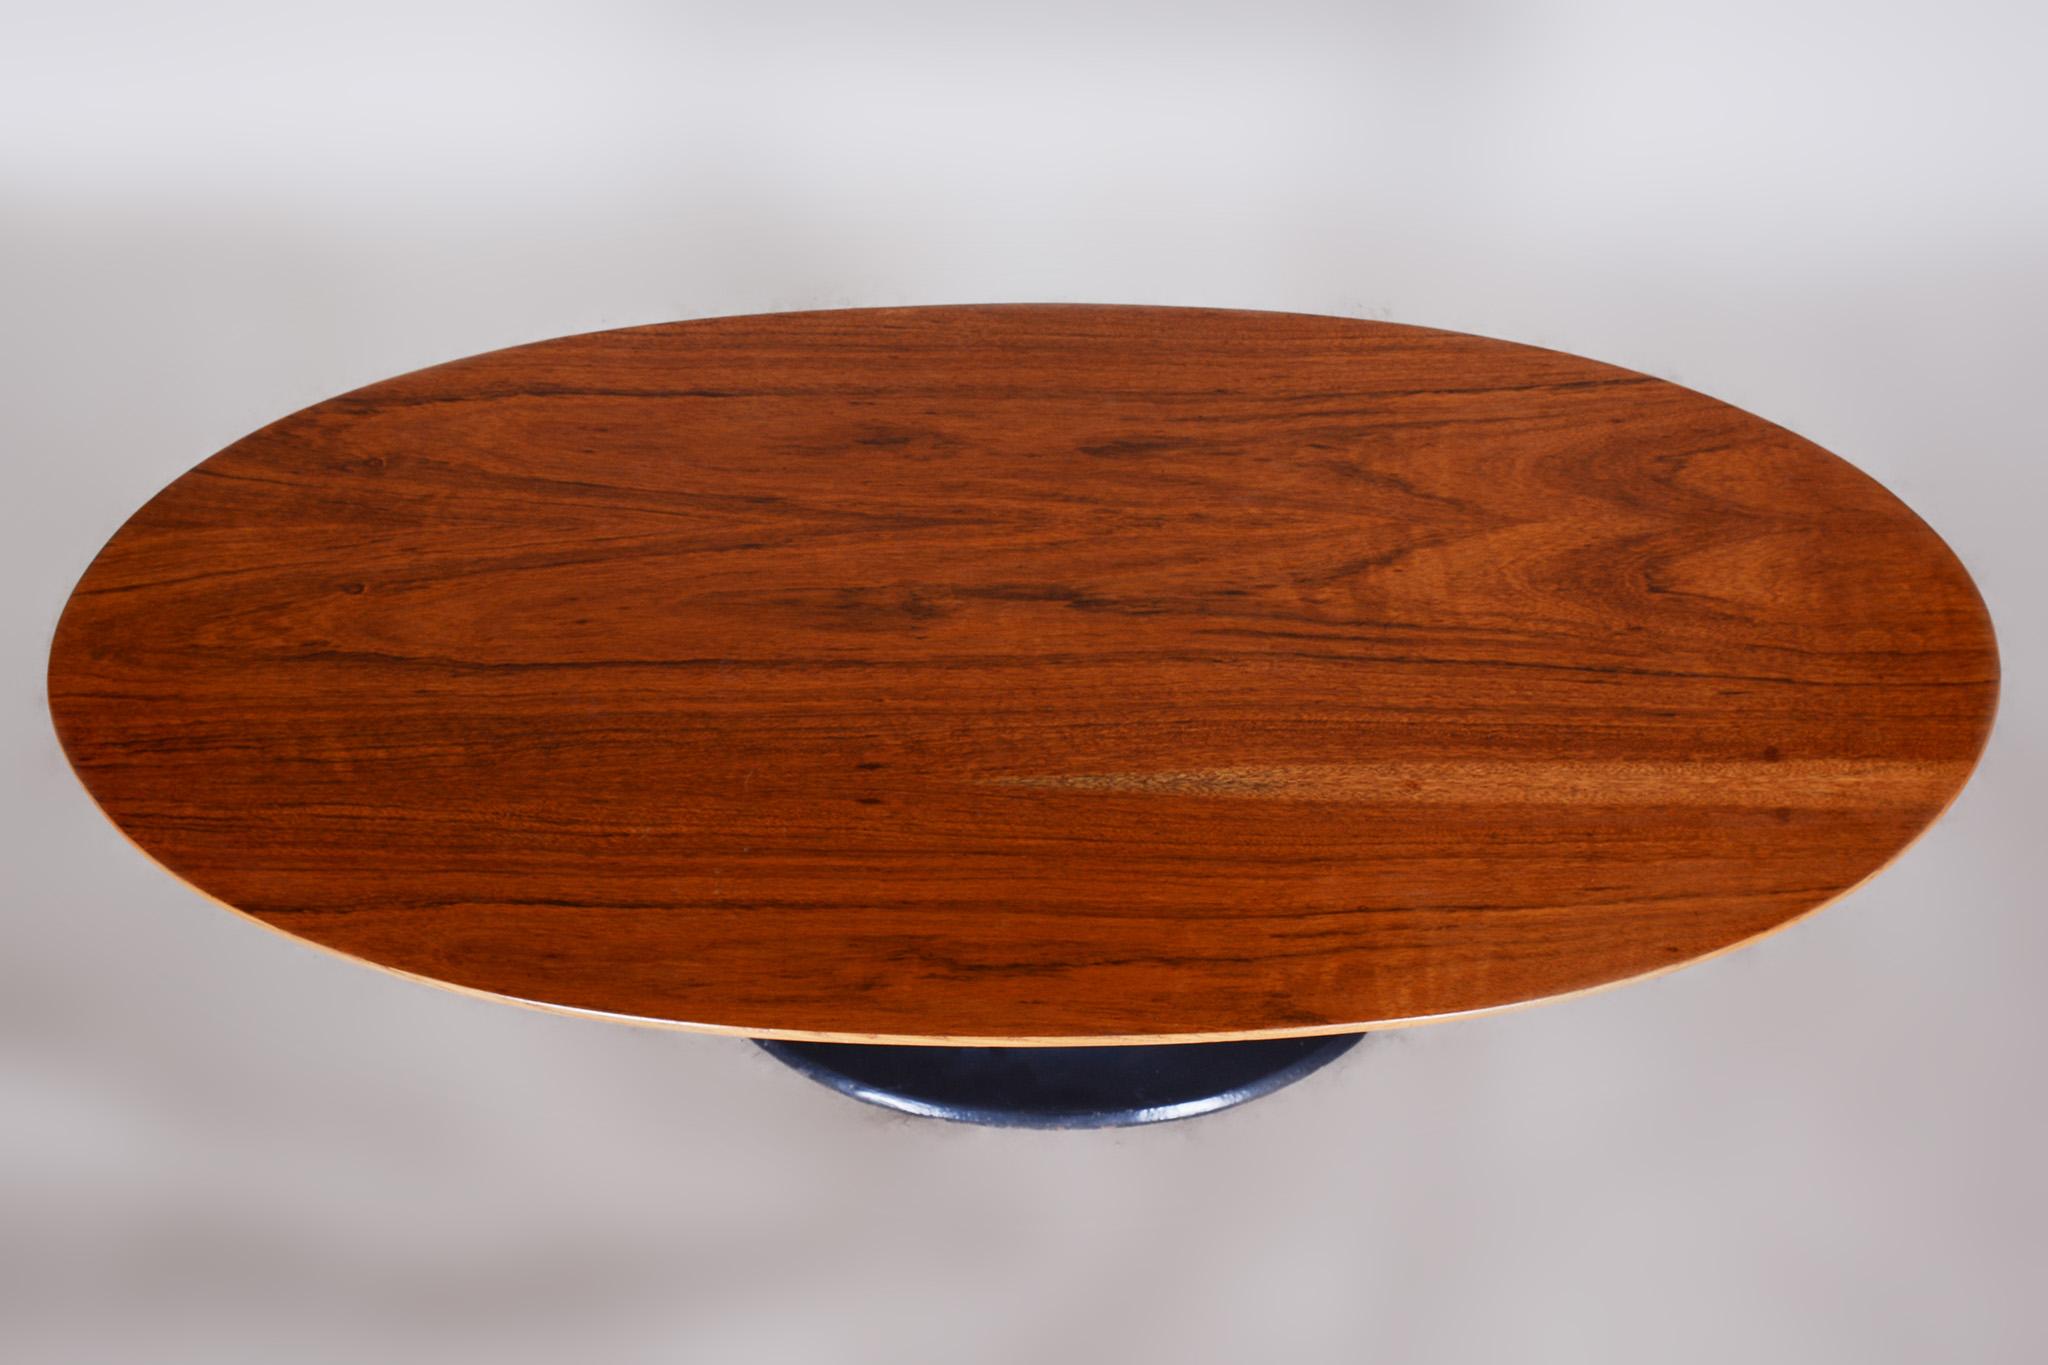 Czech Mid-Century Rosewood Oval Table with Cast Iron Base, 1950s For Sale 1